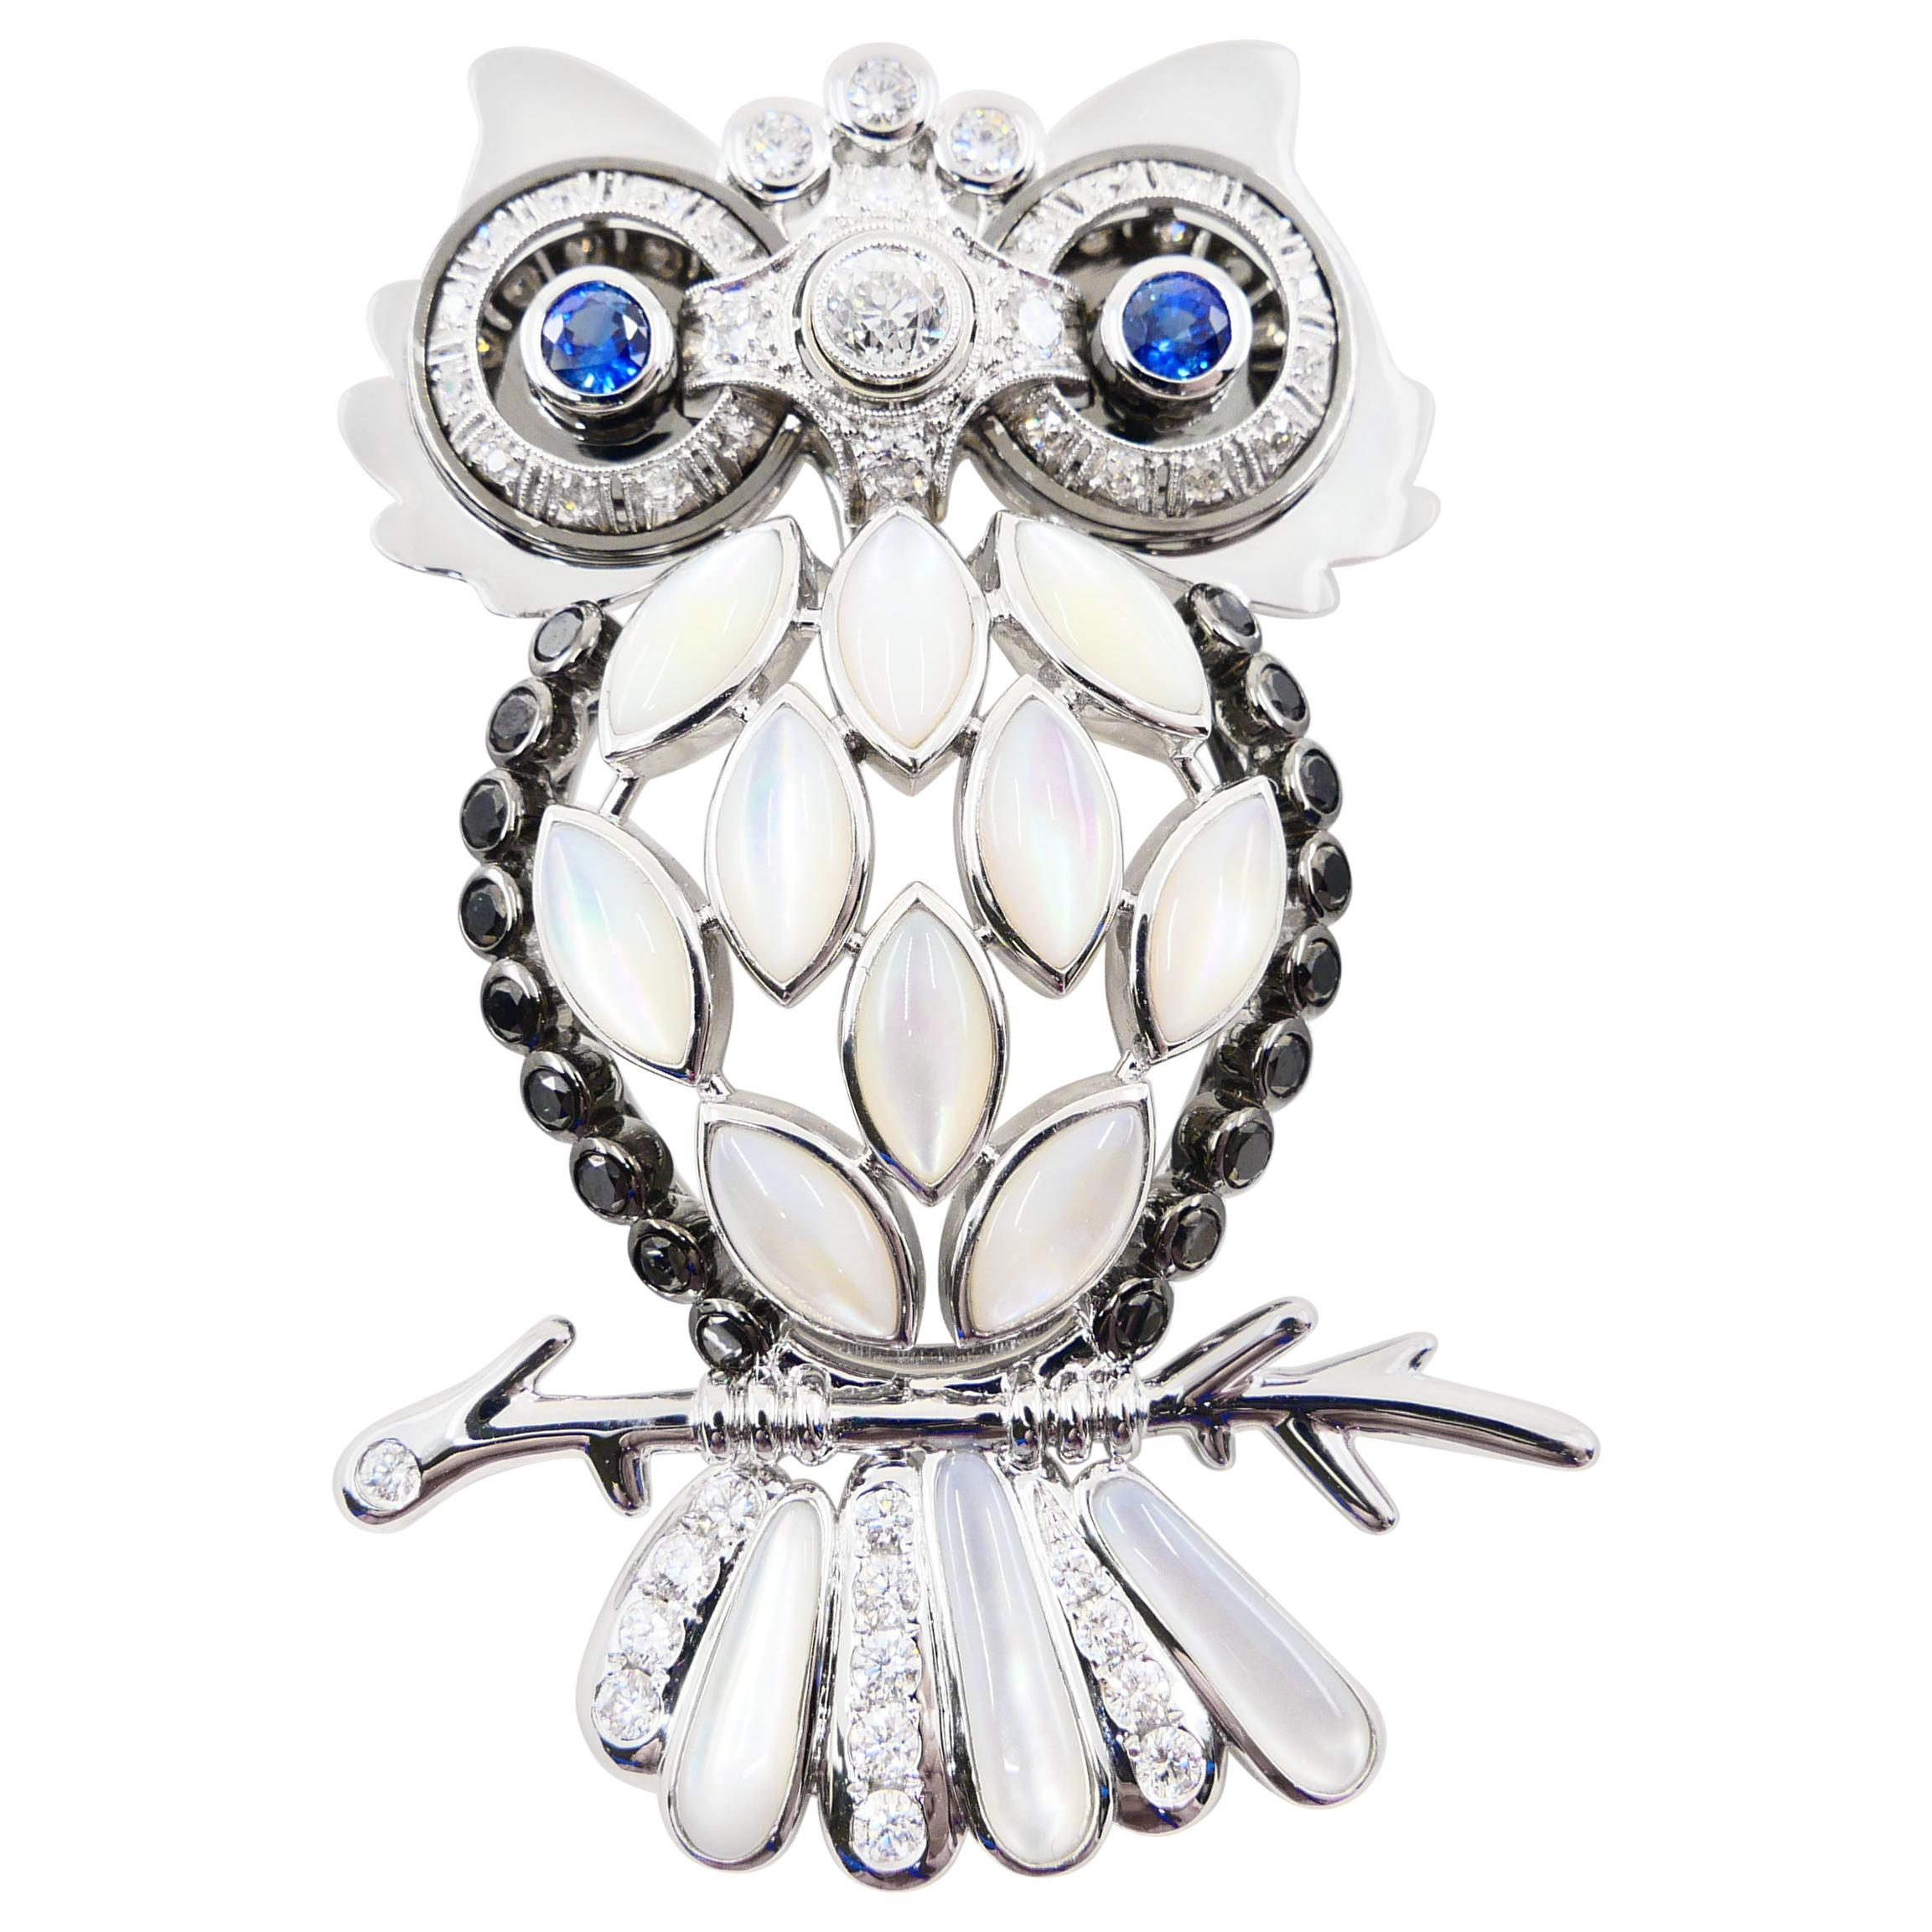 Old Cut and Black Diamonds, Sapphires, White Mother of Pearl Owl Brooch/Pendant For Sale 3